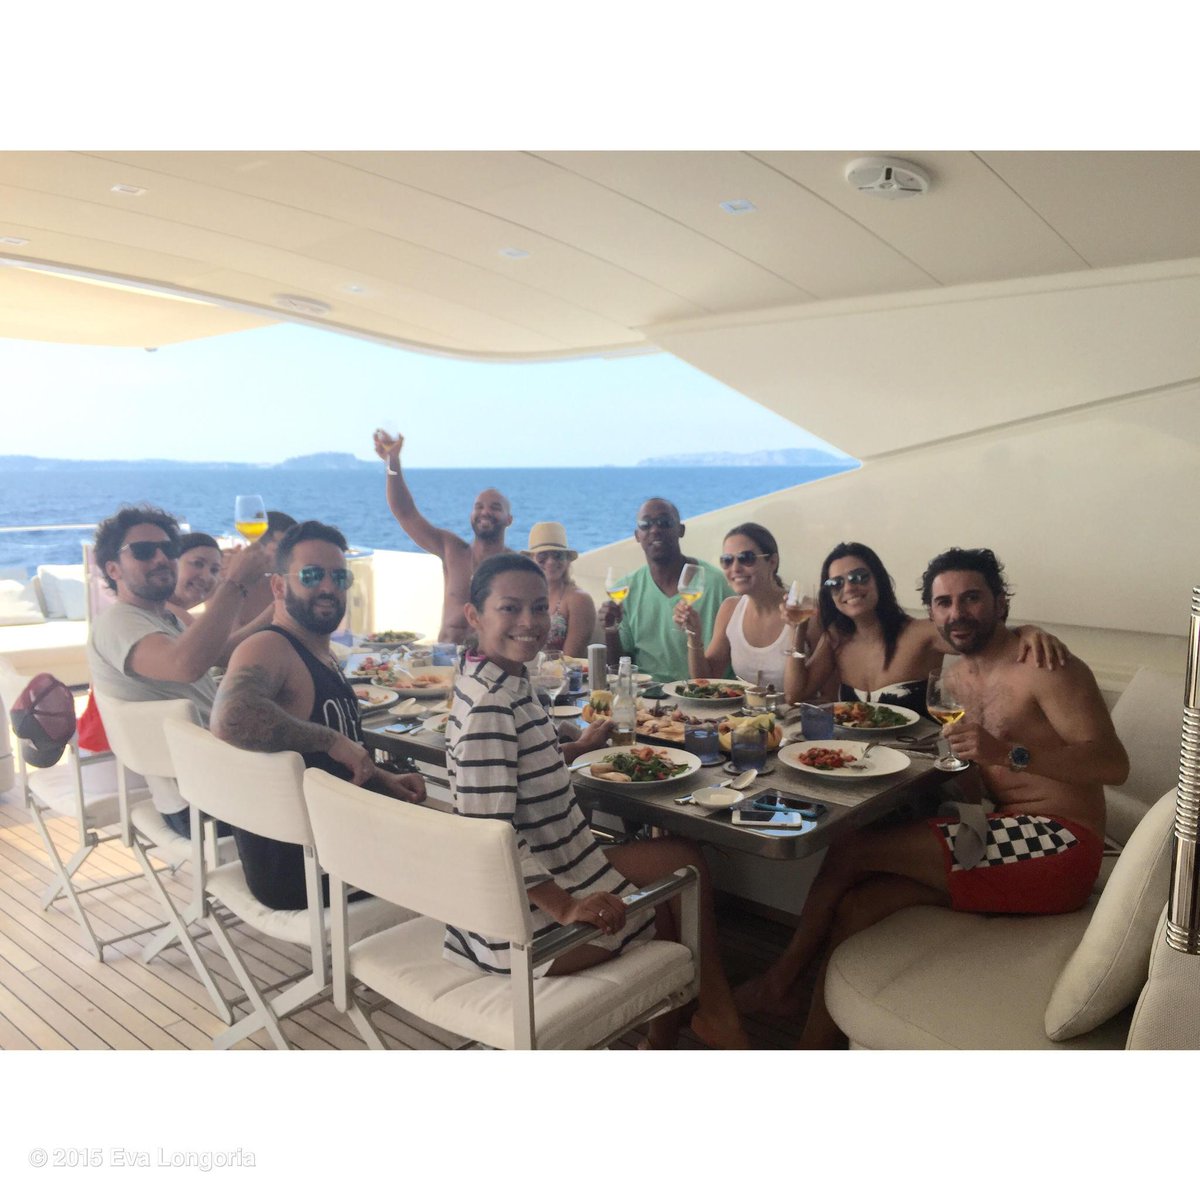 Lunch time with friends! #Blessed #Italy #MakeEverydayCount http://t.co/dWKO6Oa87W